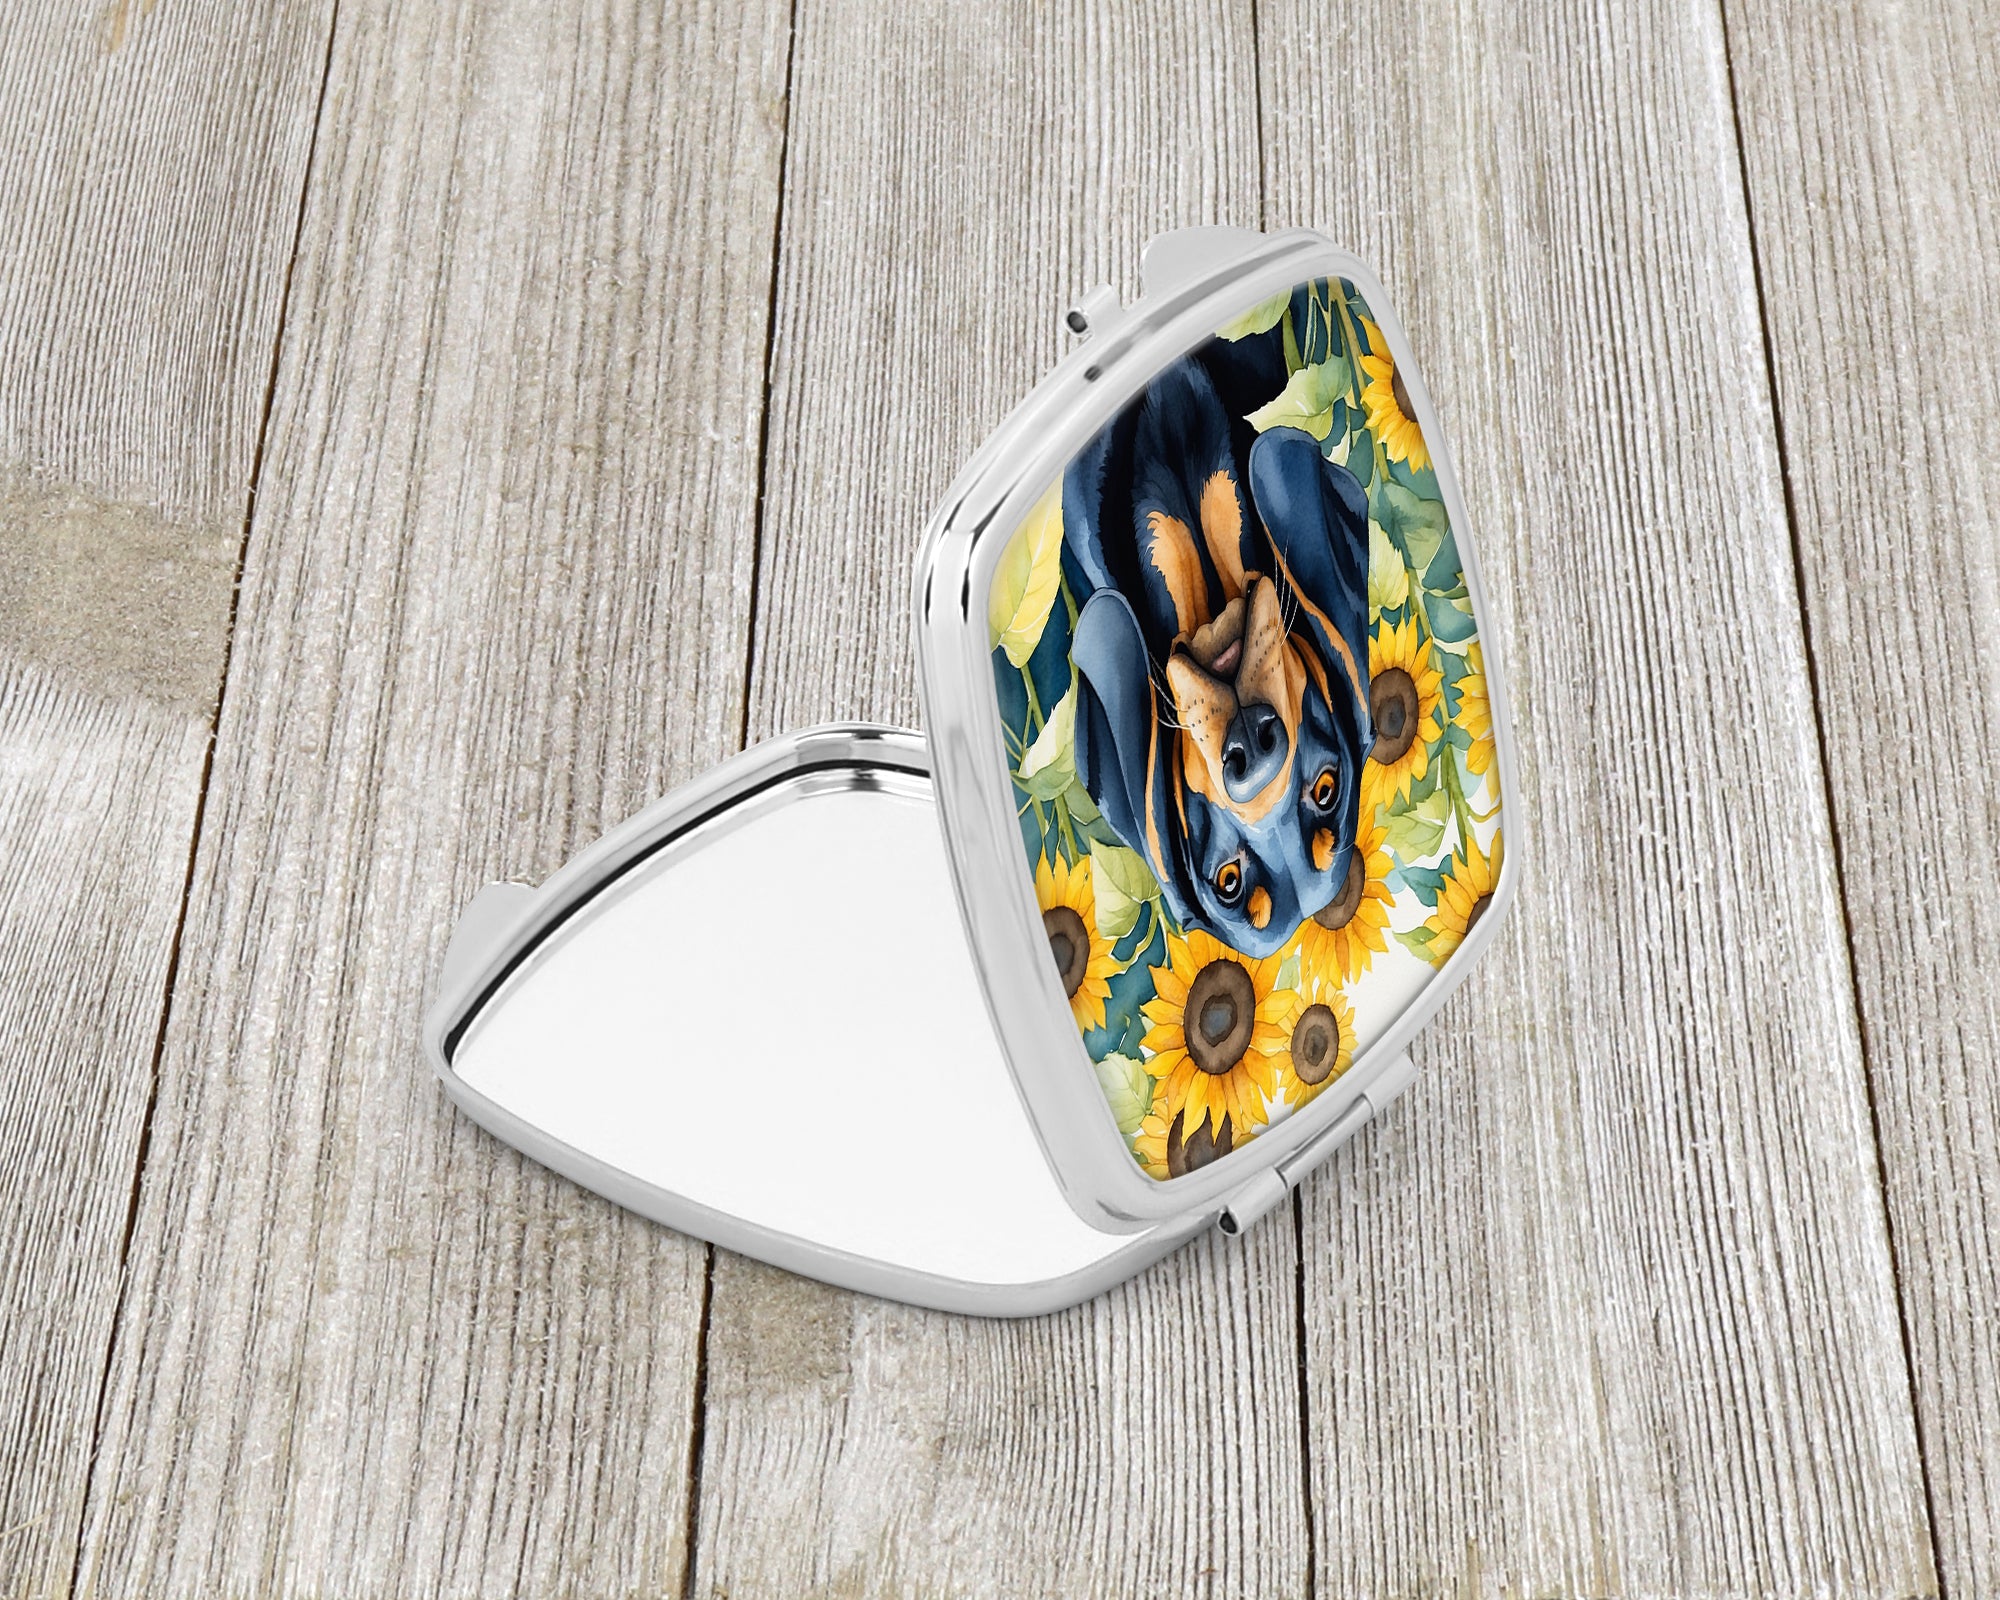 Black and Tan Coonhound in Sunflowers Compact Mirror